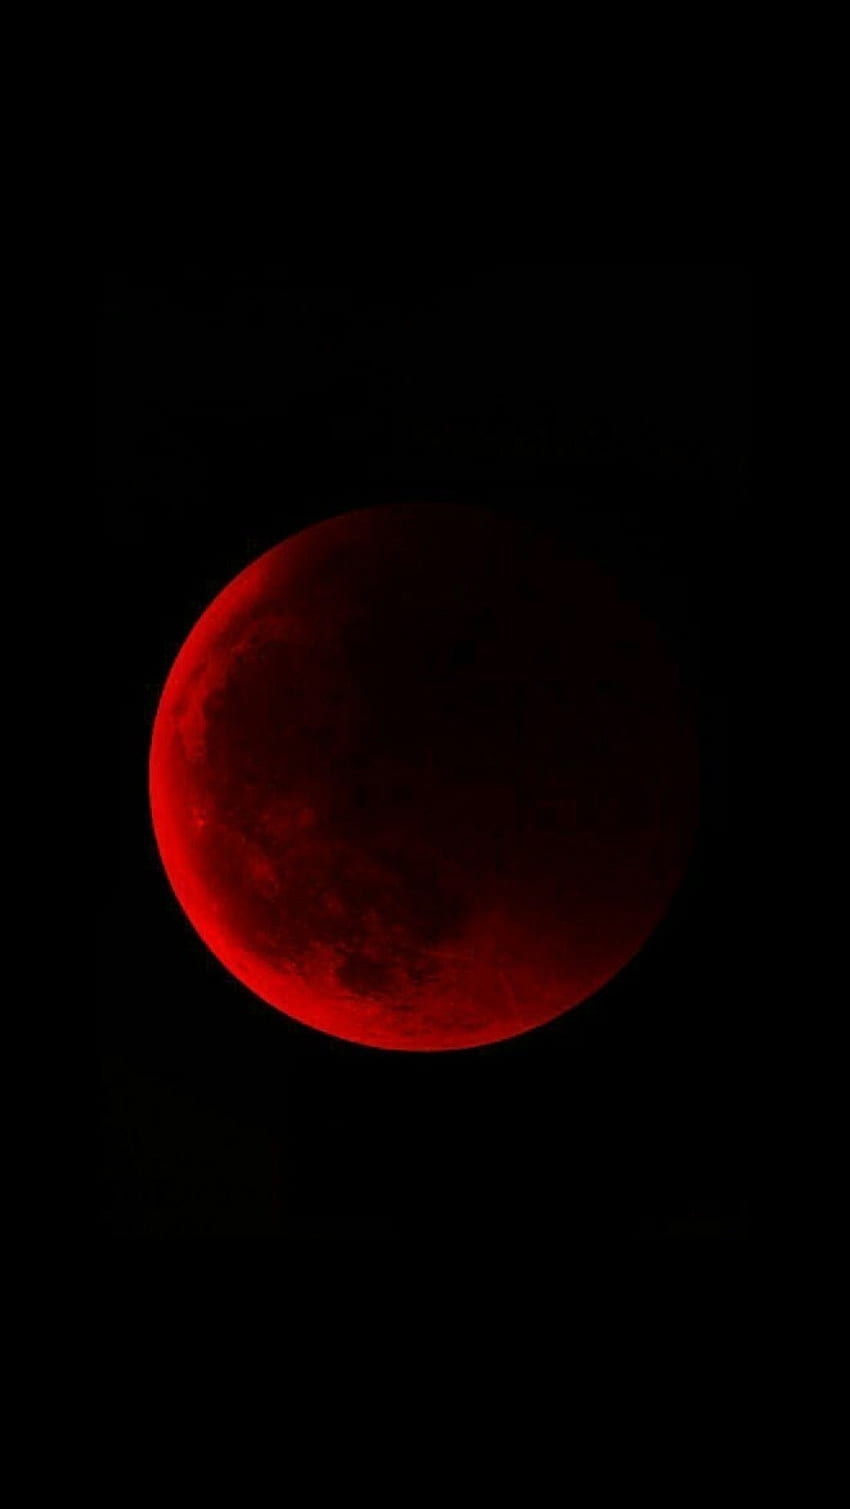 Blood Red Moon IPhone Wallpaper  IPhone Wallpapers  iPhone Wallpapers